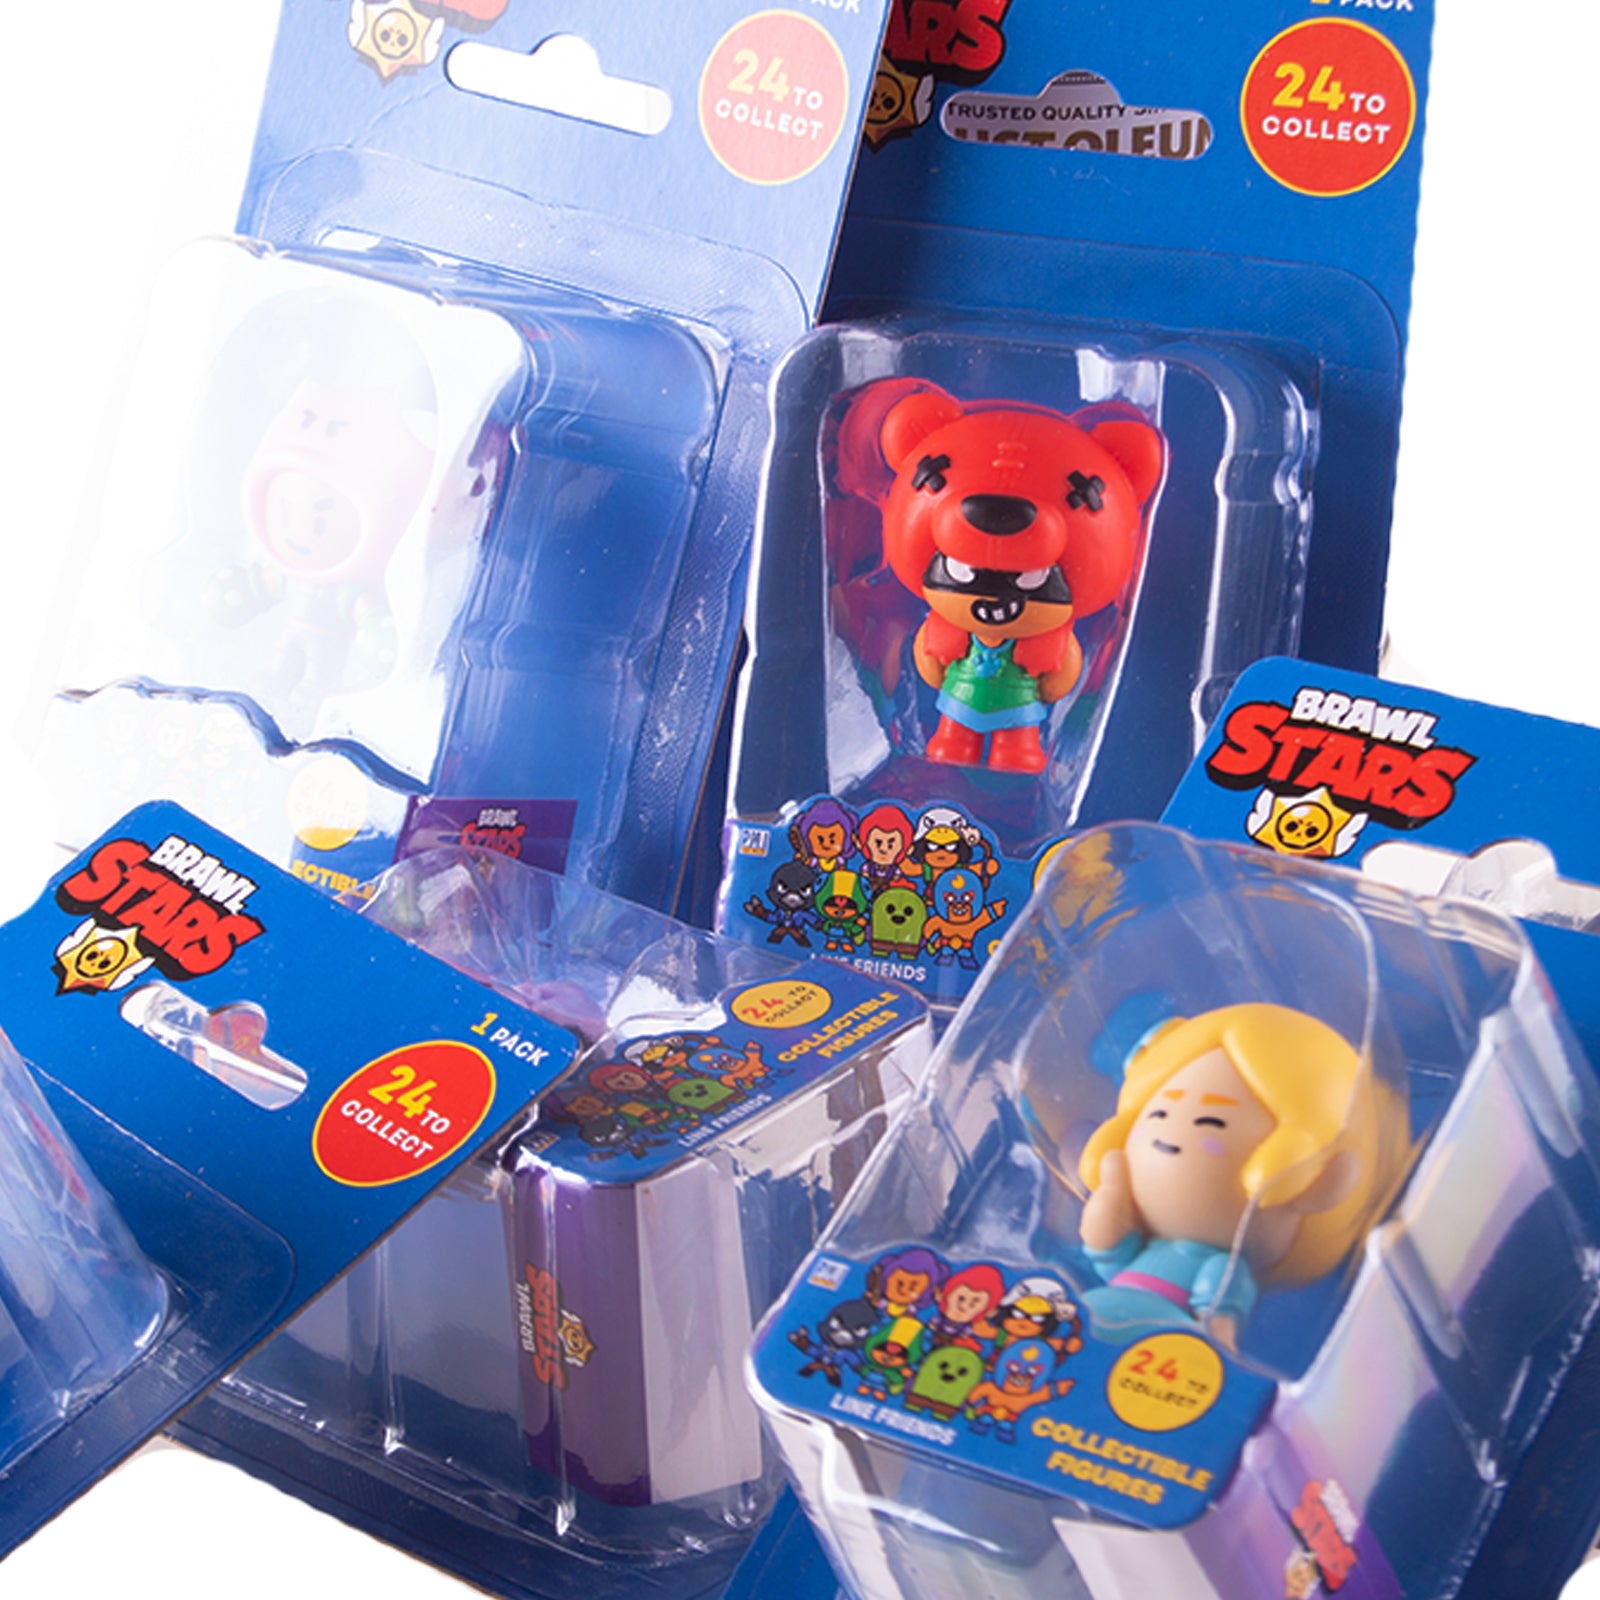 Brawl Stars Action Figures 1 Pack - Assorted